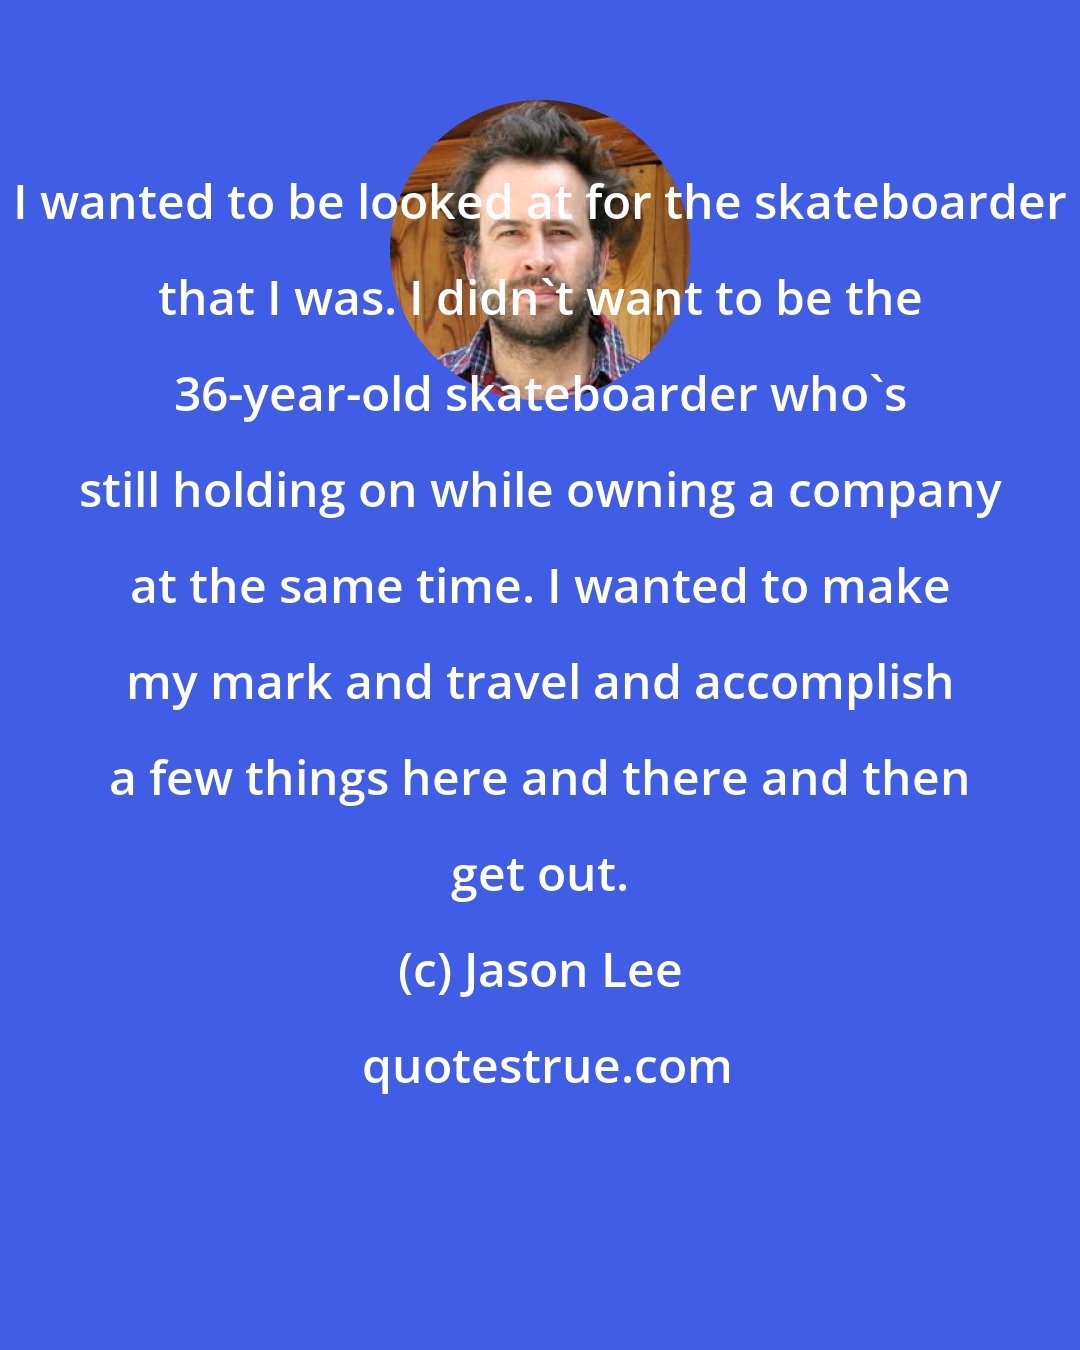 Jason Lee: I wanted to be looked at for the skateboarder that I was. I didn't want to be the 36-year-old skateboarder who's still holding on while owning a company at the same time. I wanted to make my mark and travel and accomplish a few things here and there and then get out.